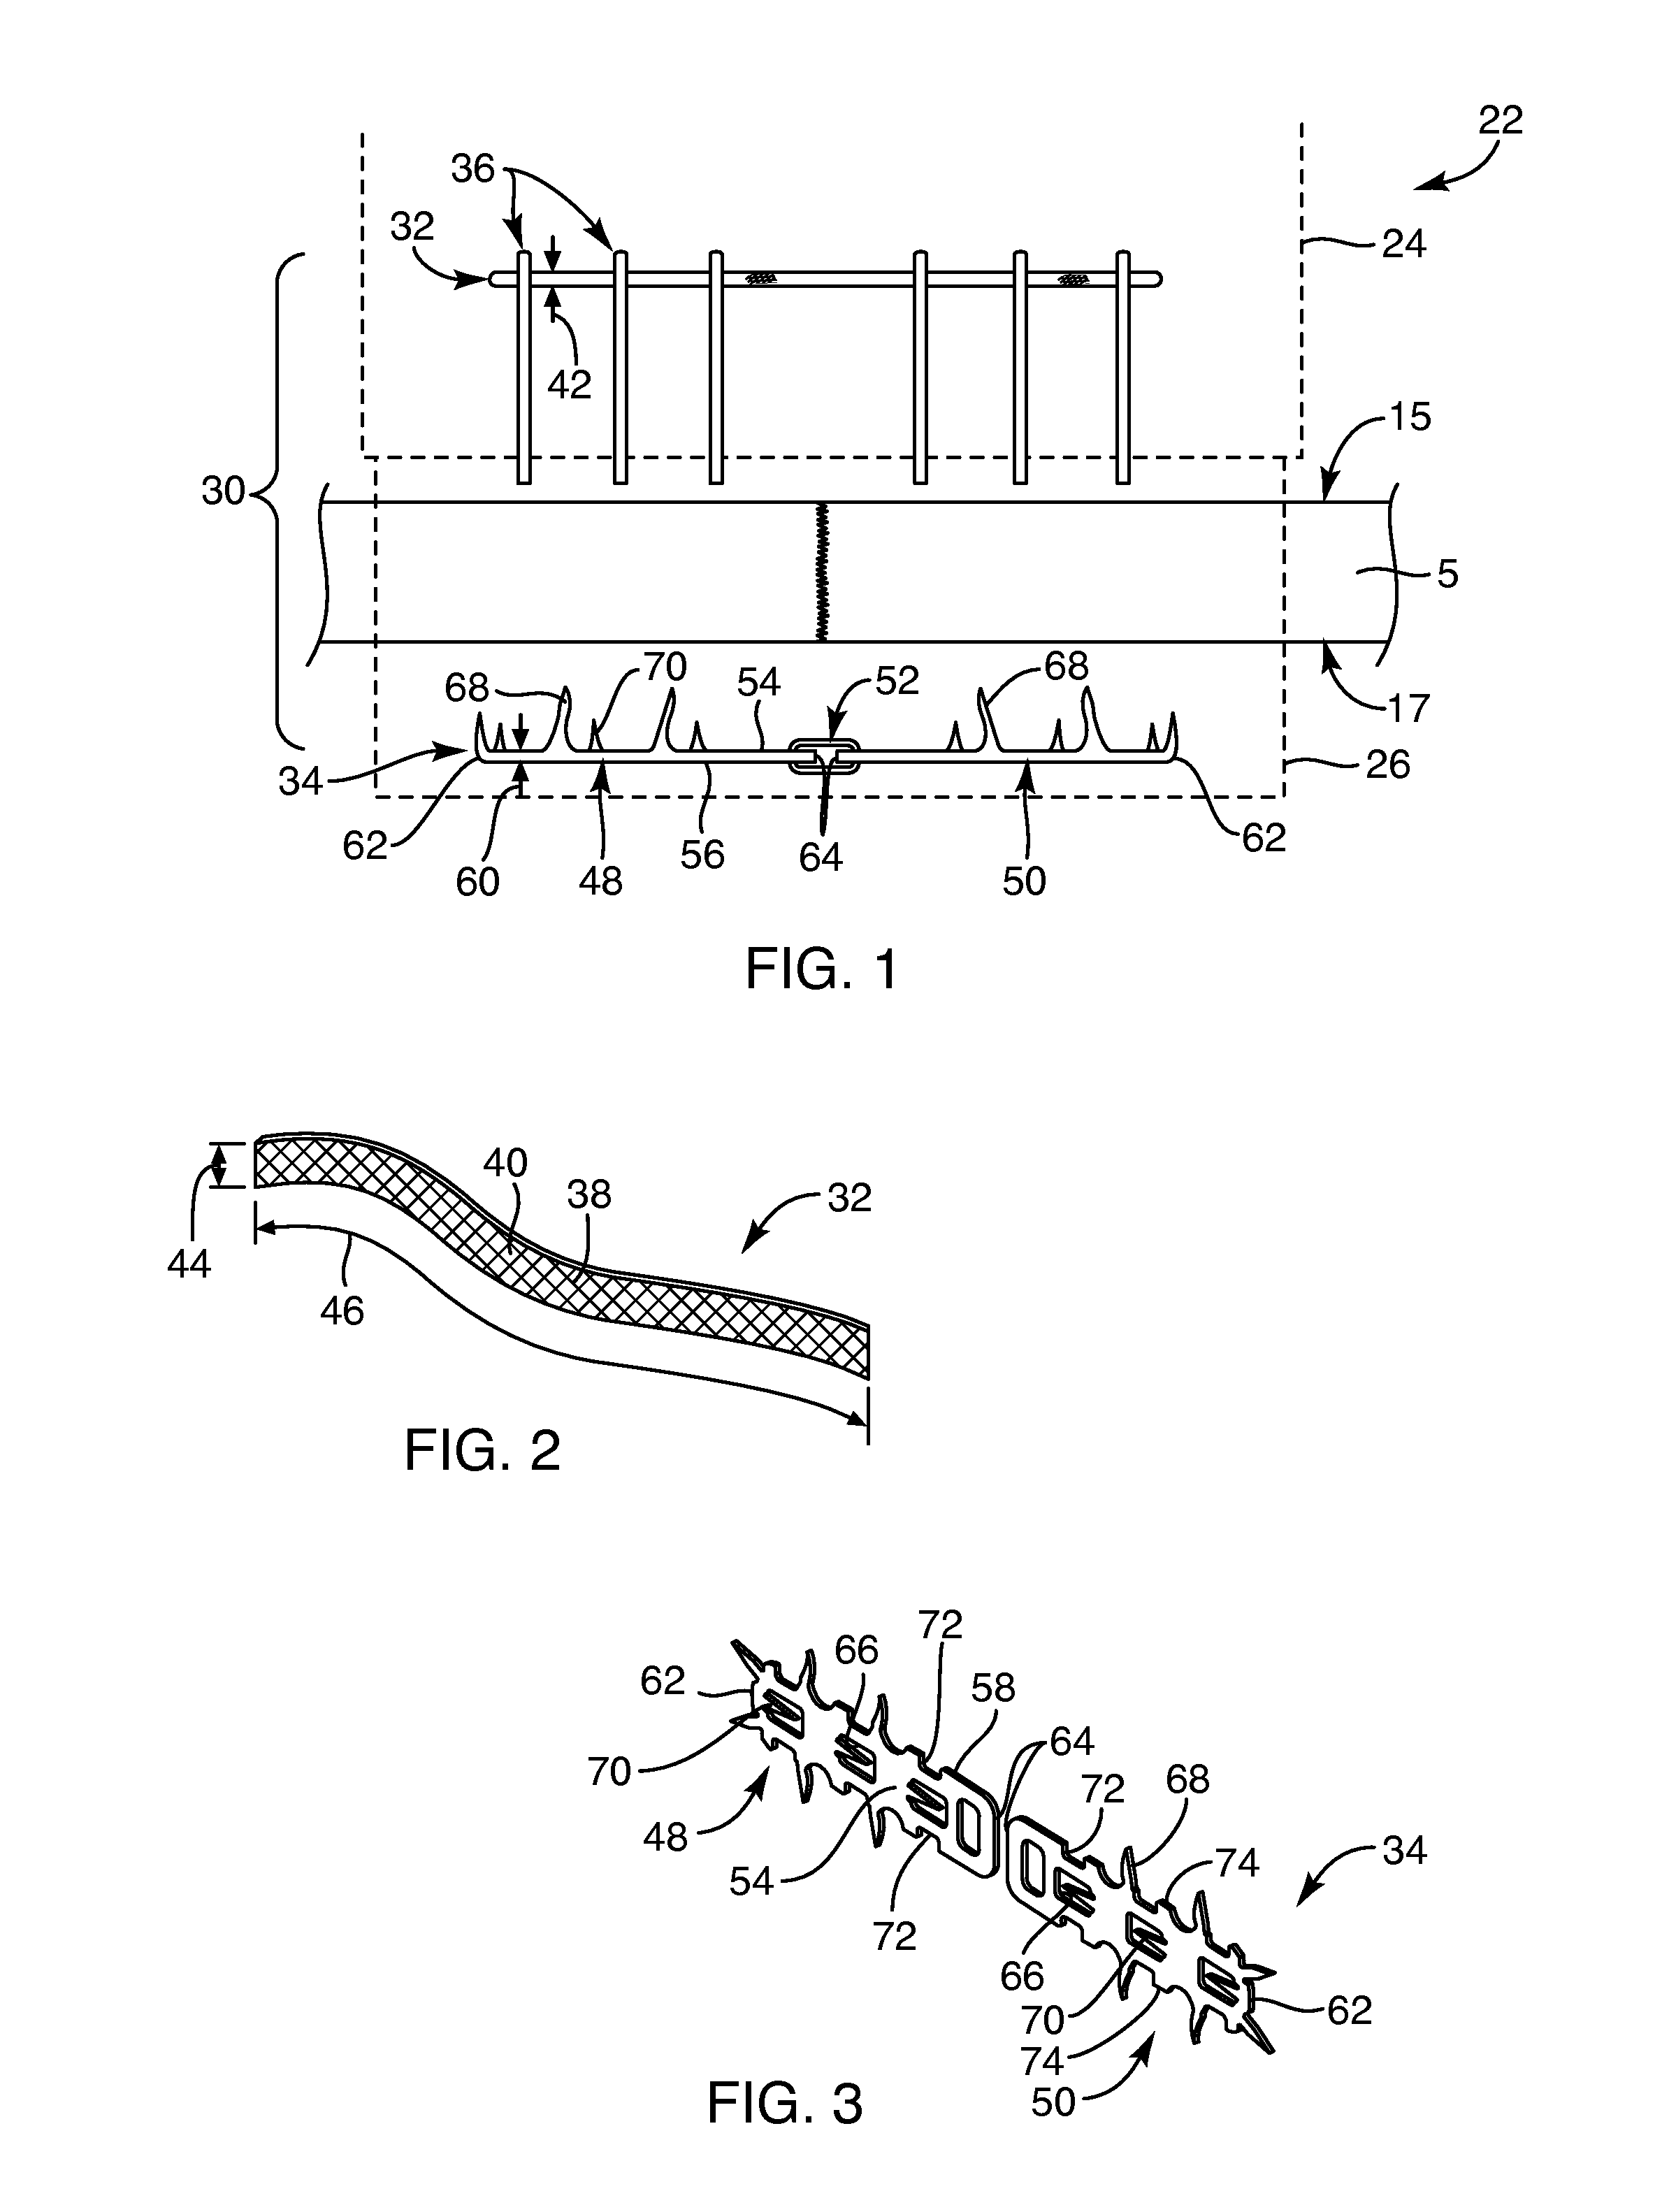 Devices, systems, and methods for repairing soft tissue and attaching soft tissue to bone